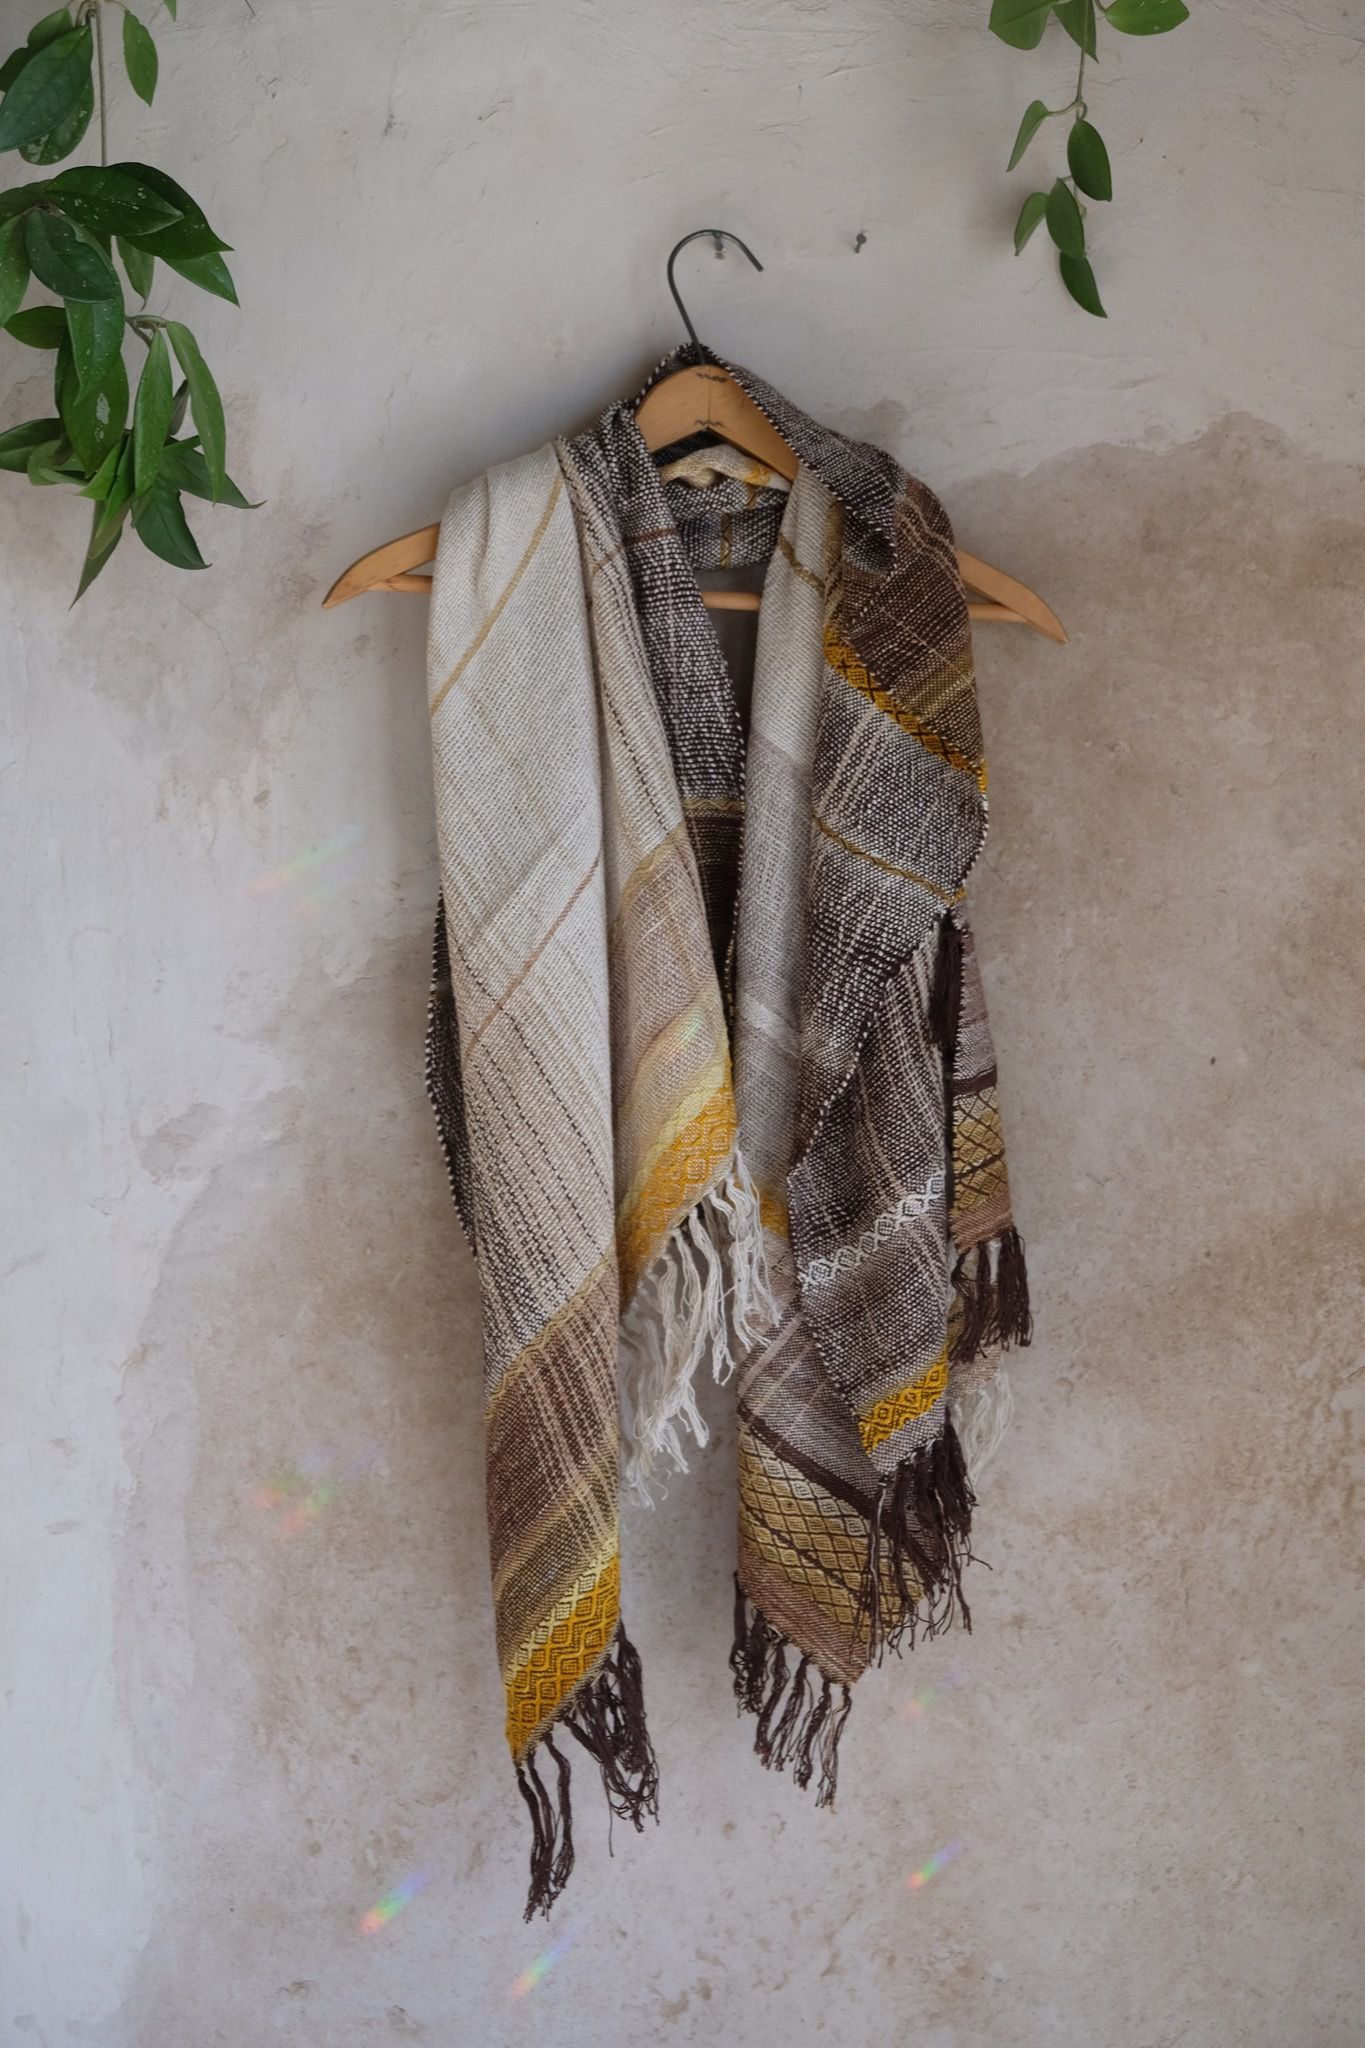 Handwoven raw silk scarf in shades of yellow on a white mannequin